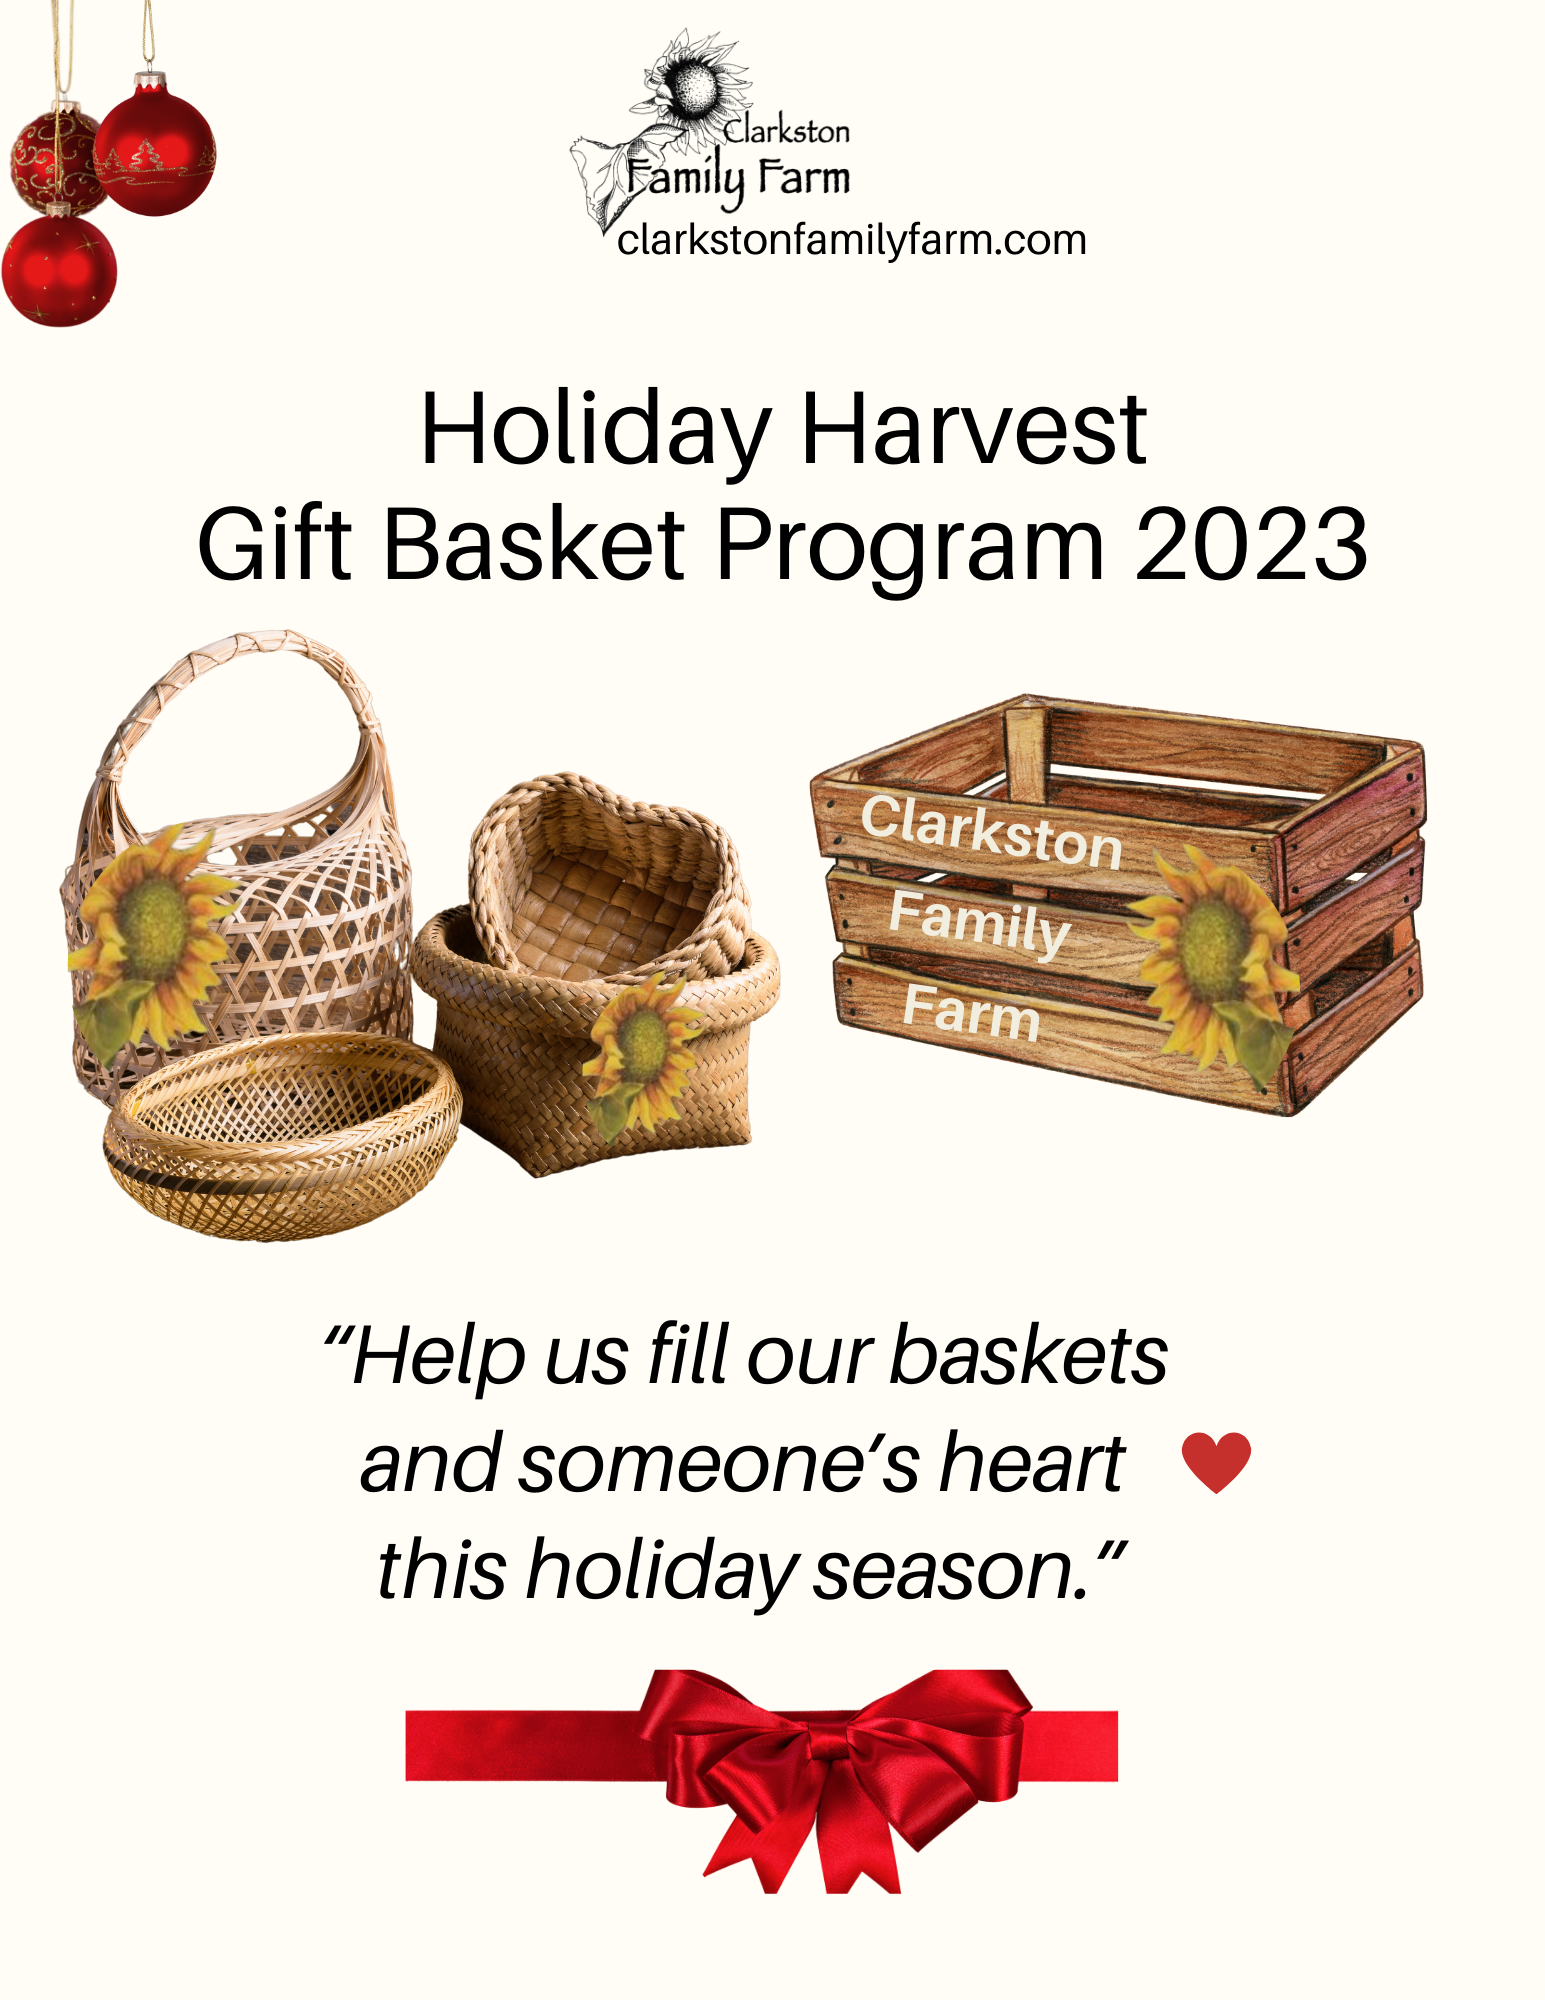 Image of baskets waiting to be filled with a red holiday ribbon